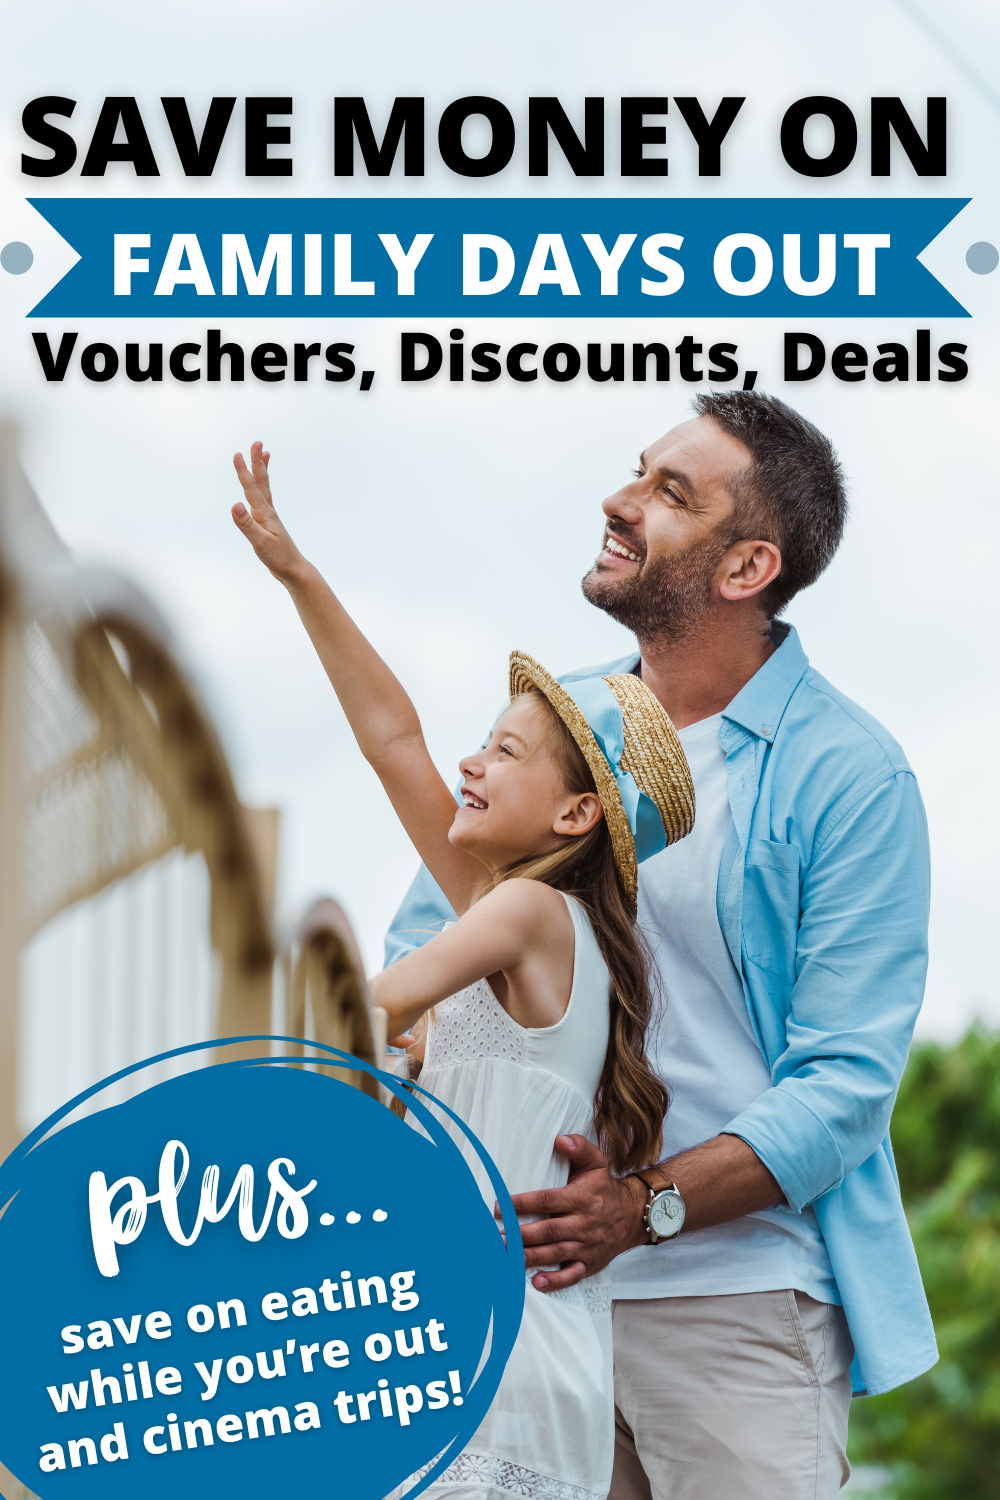 Save money on family days out, vouchers, discounts, deals girl and man at the zoo